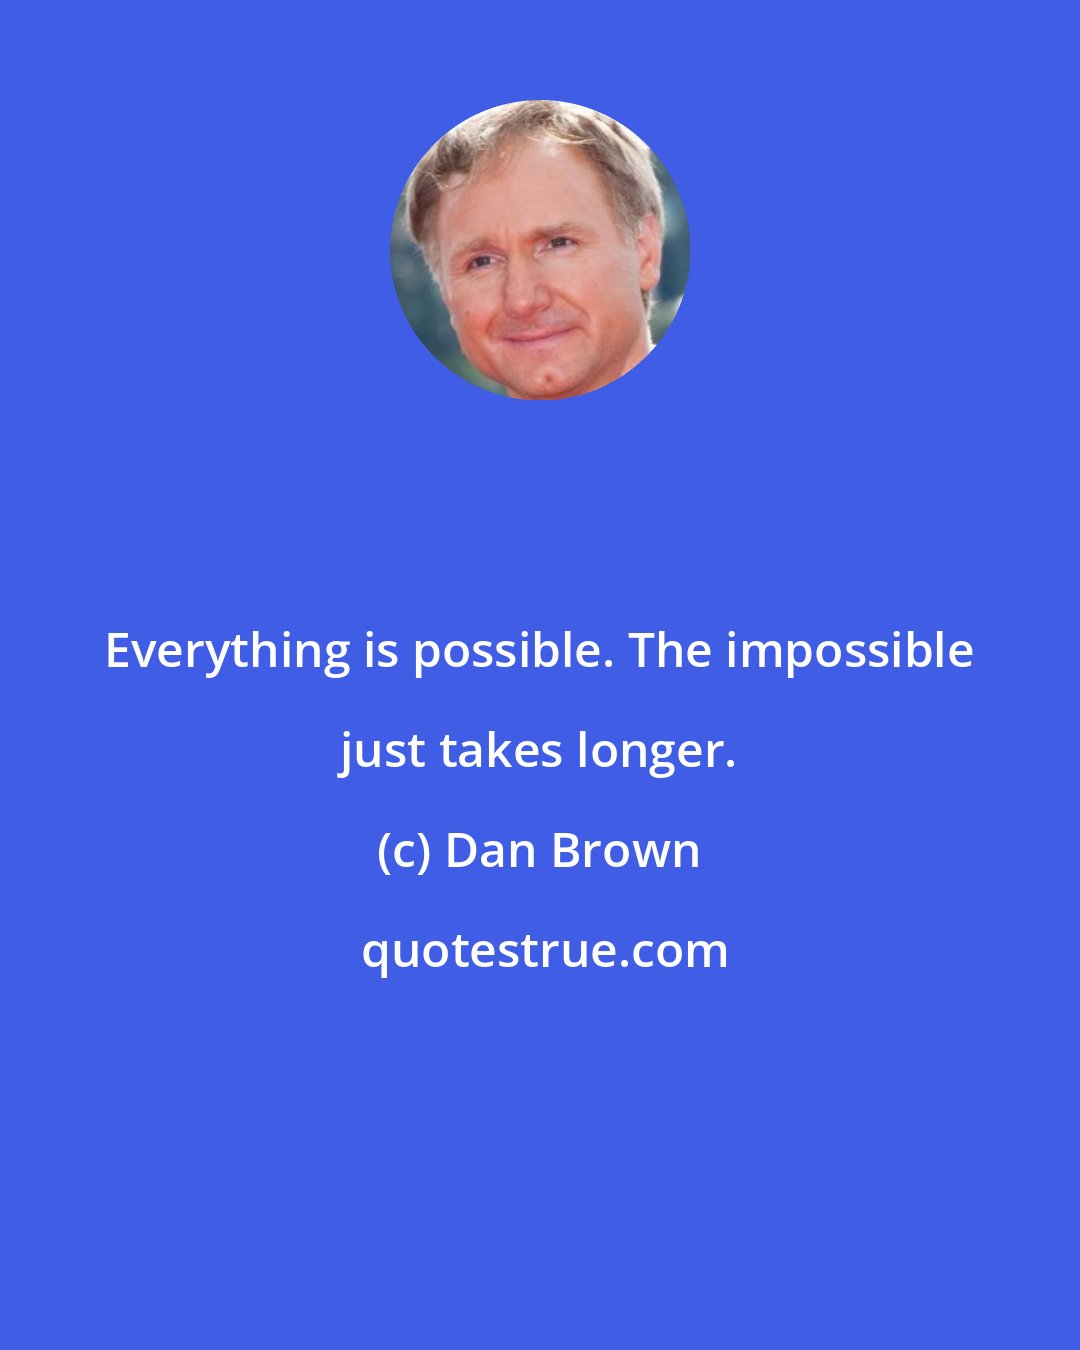 Dan Brown: Everything is possible. The impossible just takes longer.